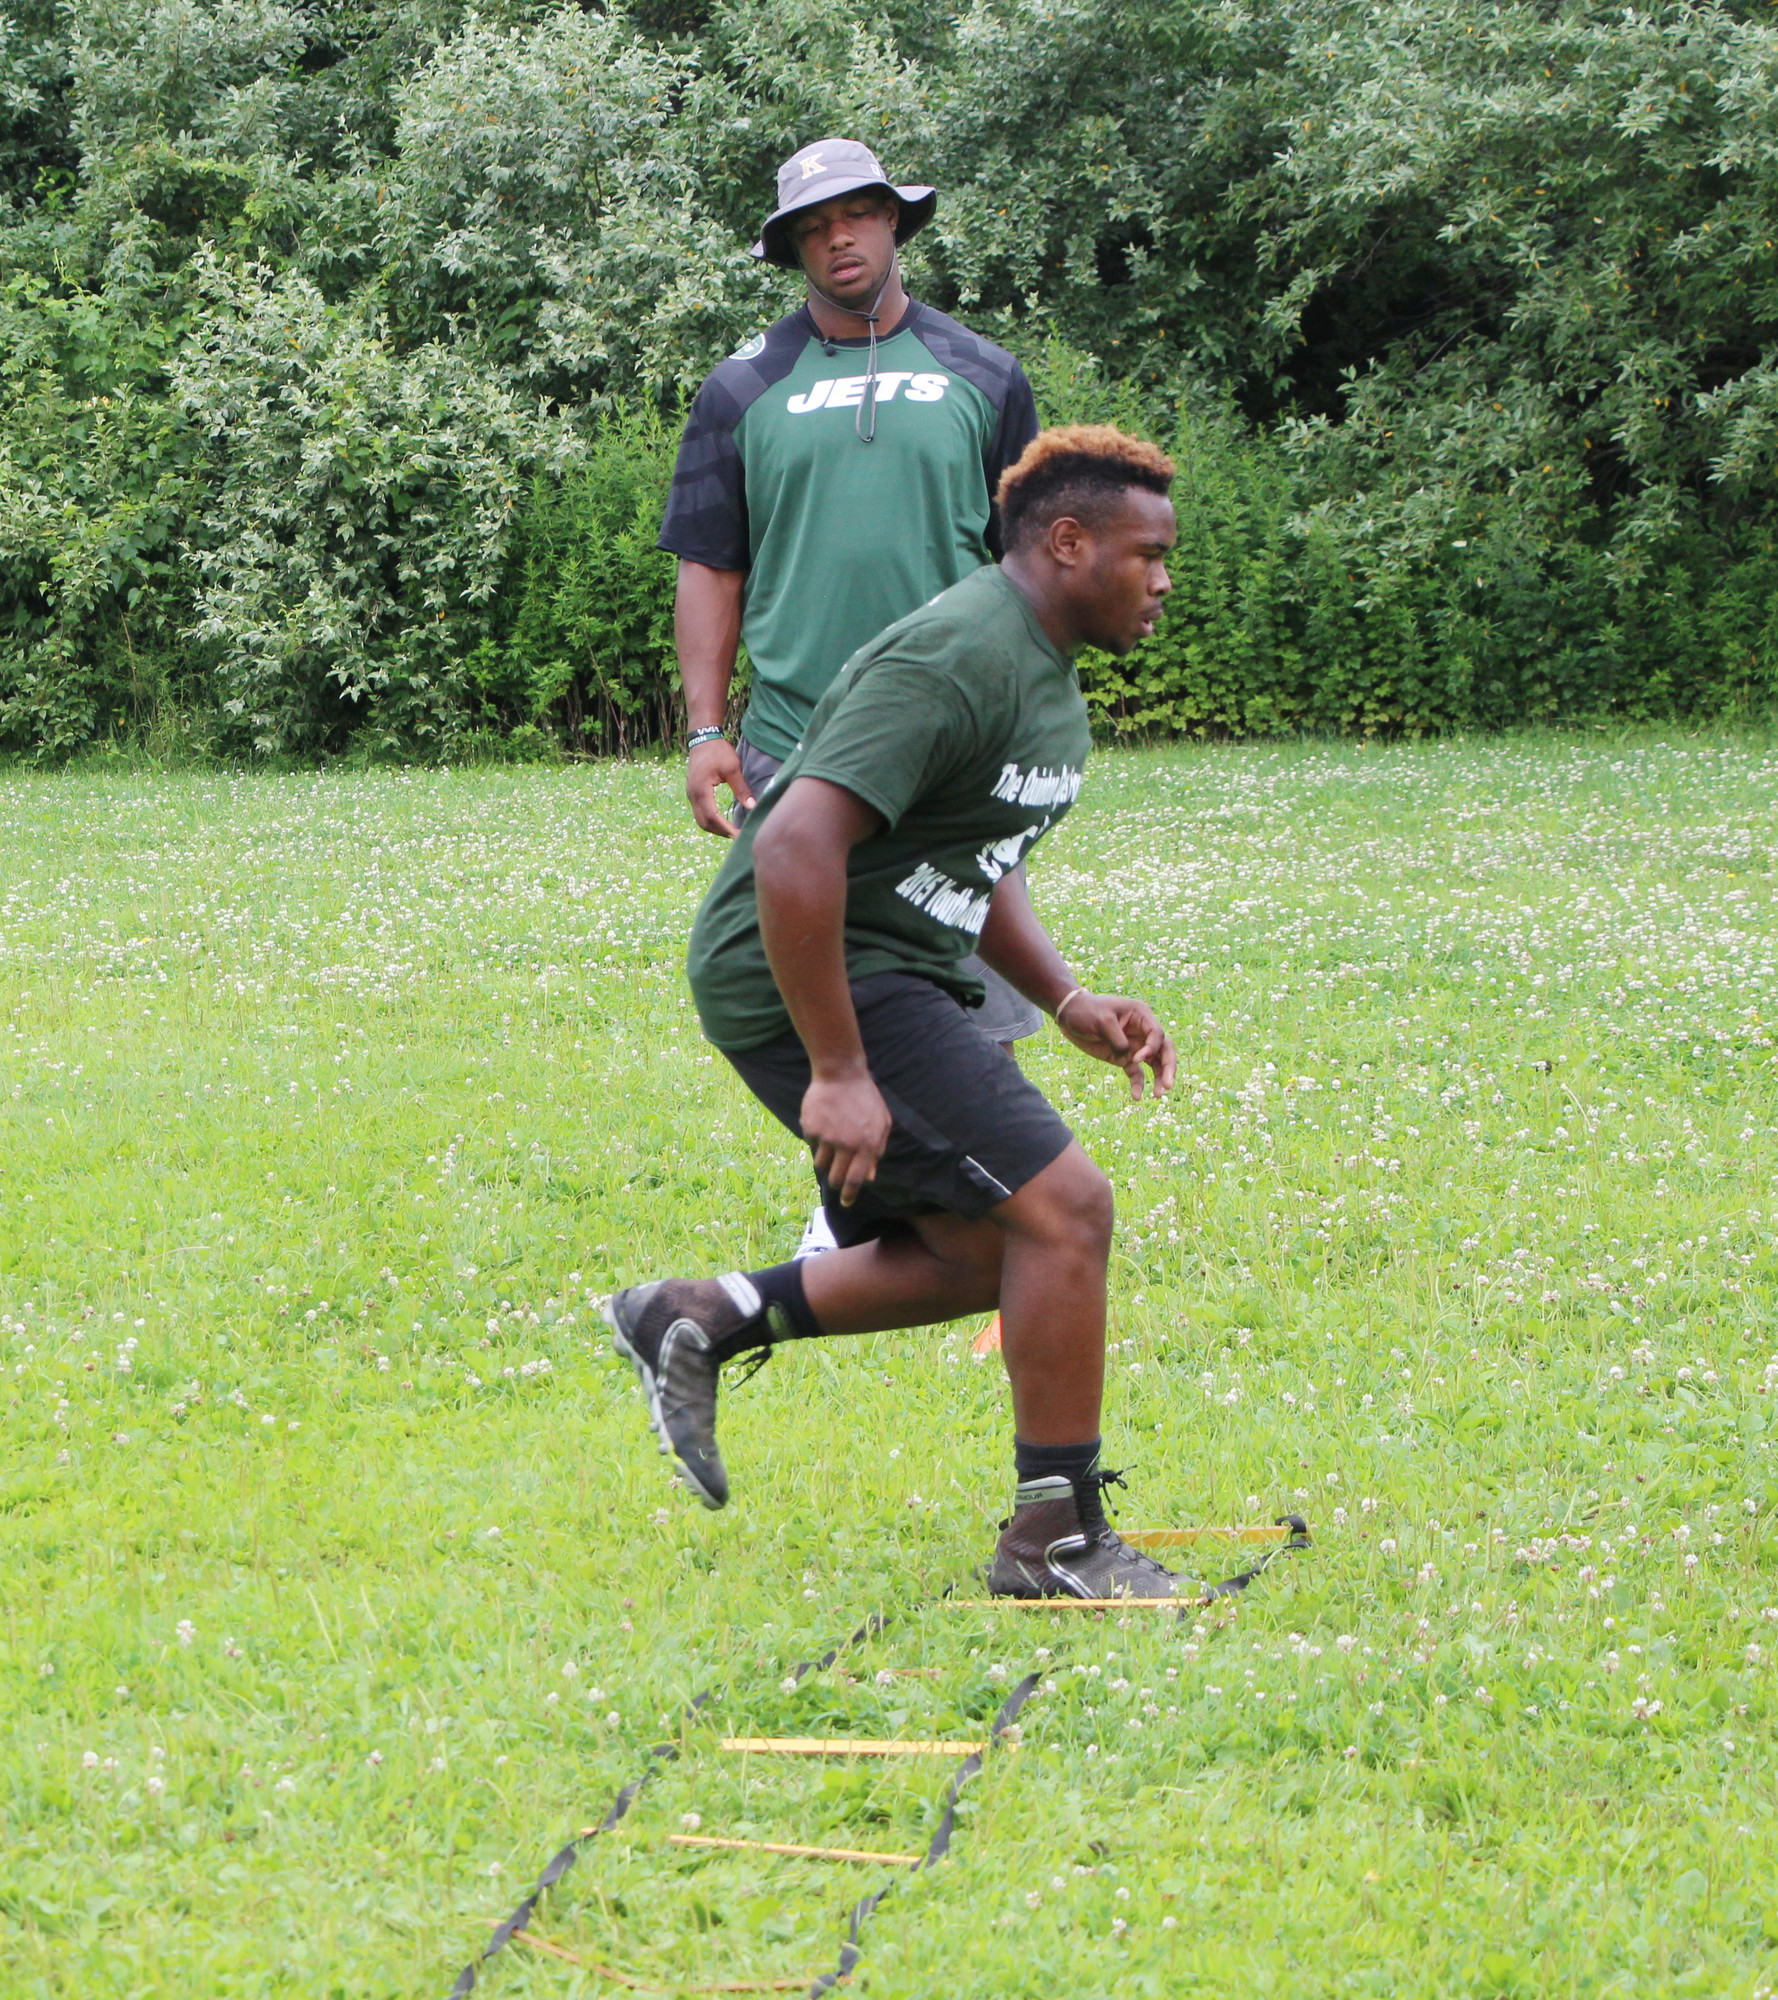 Baldwin High School football player Jahcorie Norworthy worked on his footwork as Coples watched.